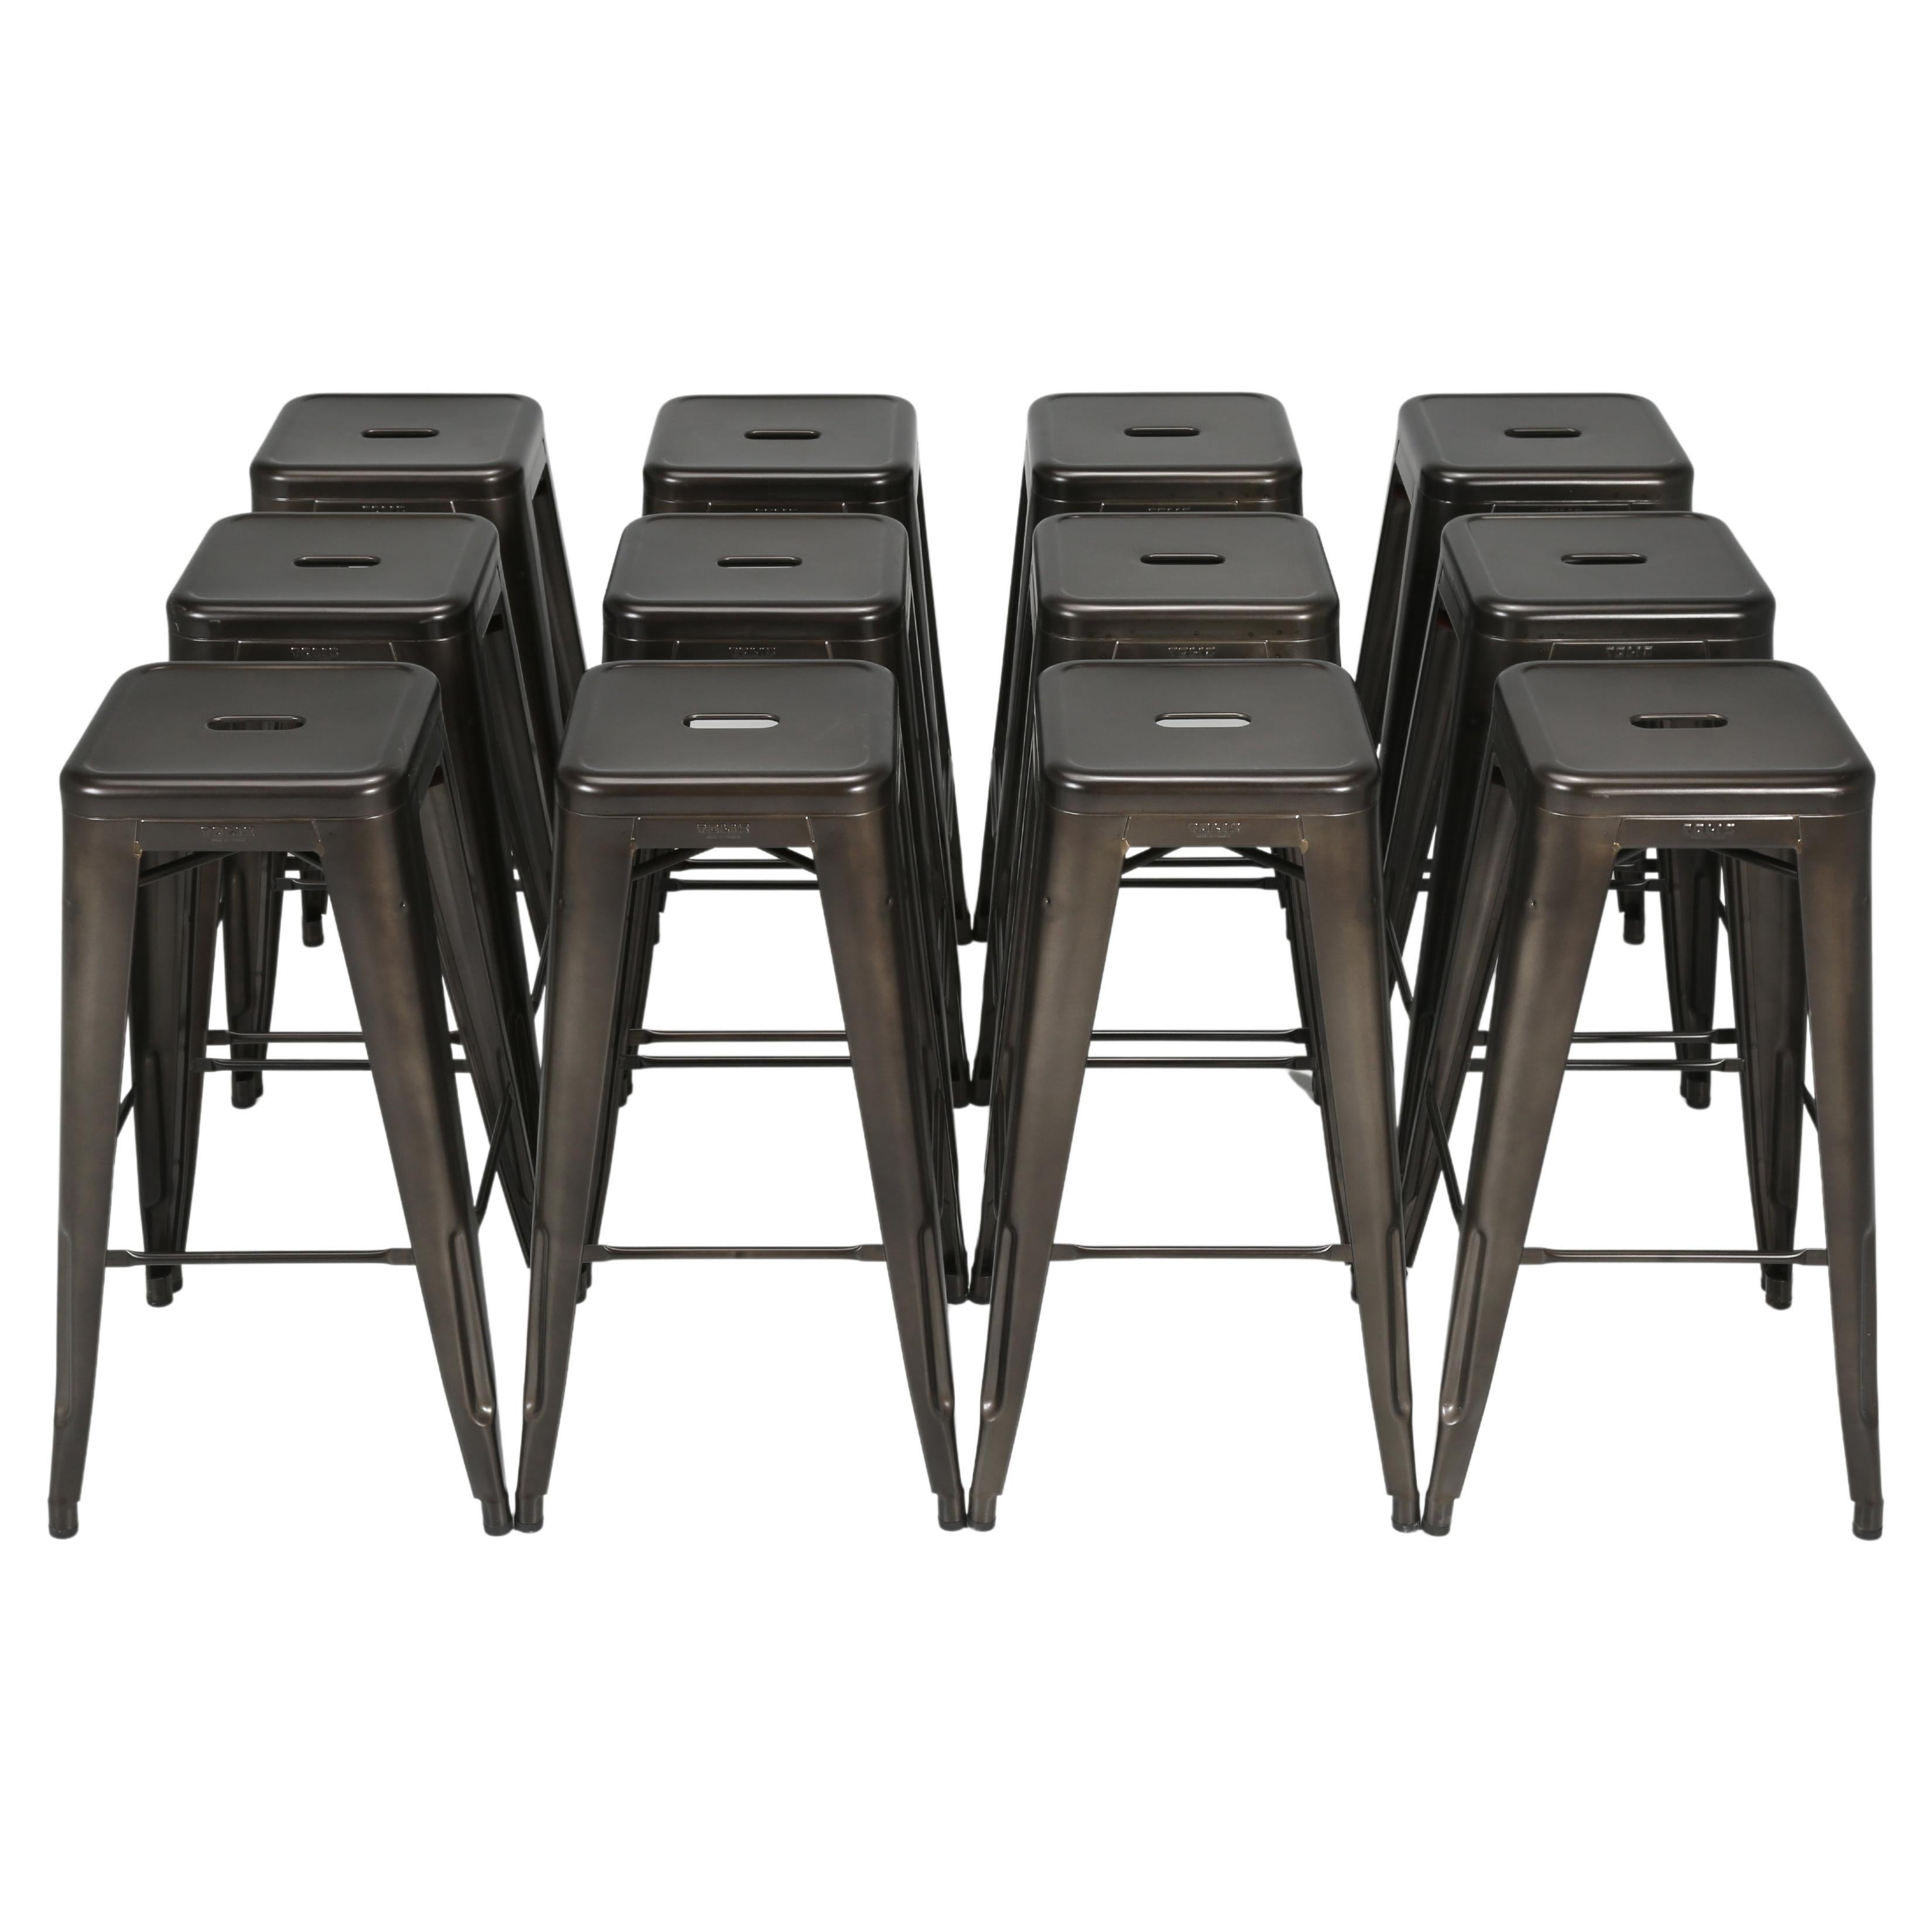 Tolix Bar Height Steel Stacking Stools, Hand-Made in France in Warm Graphite